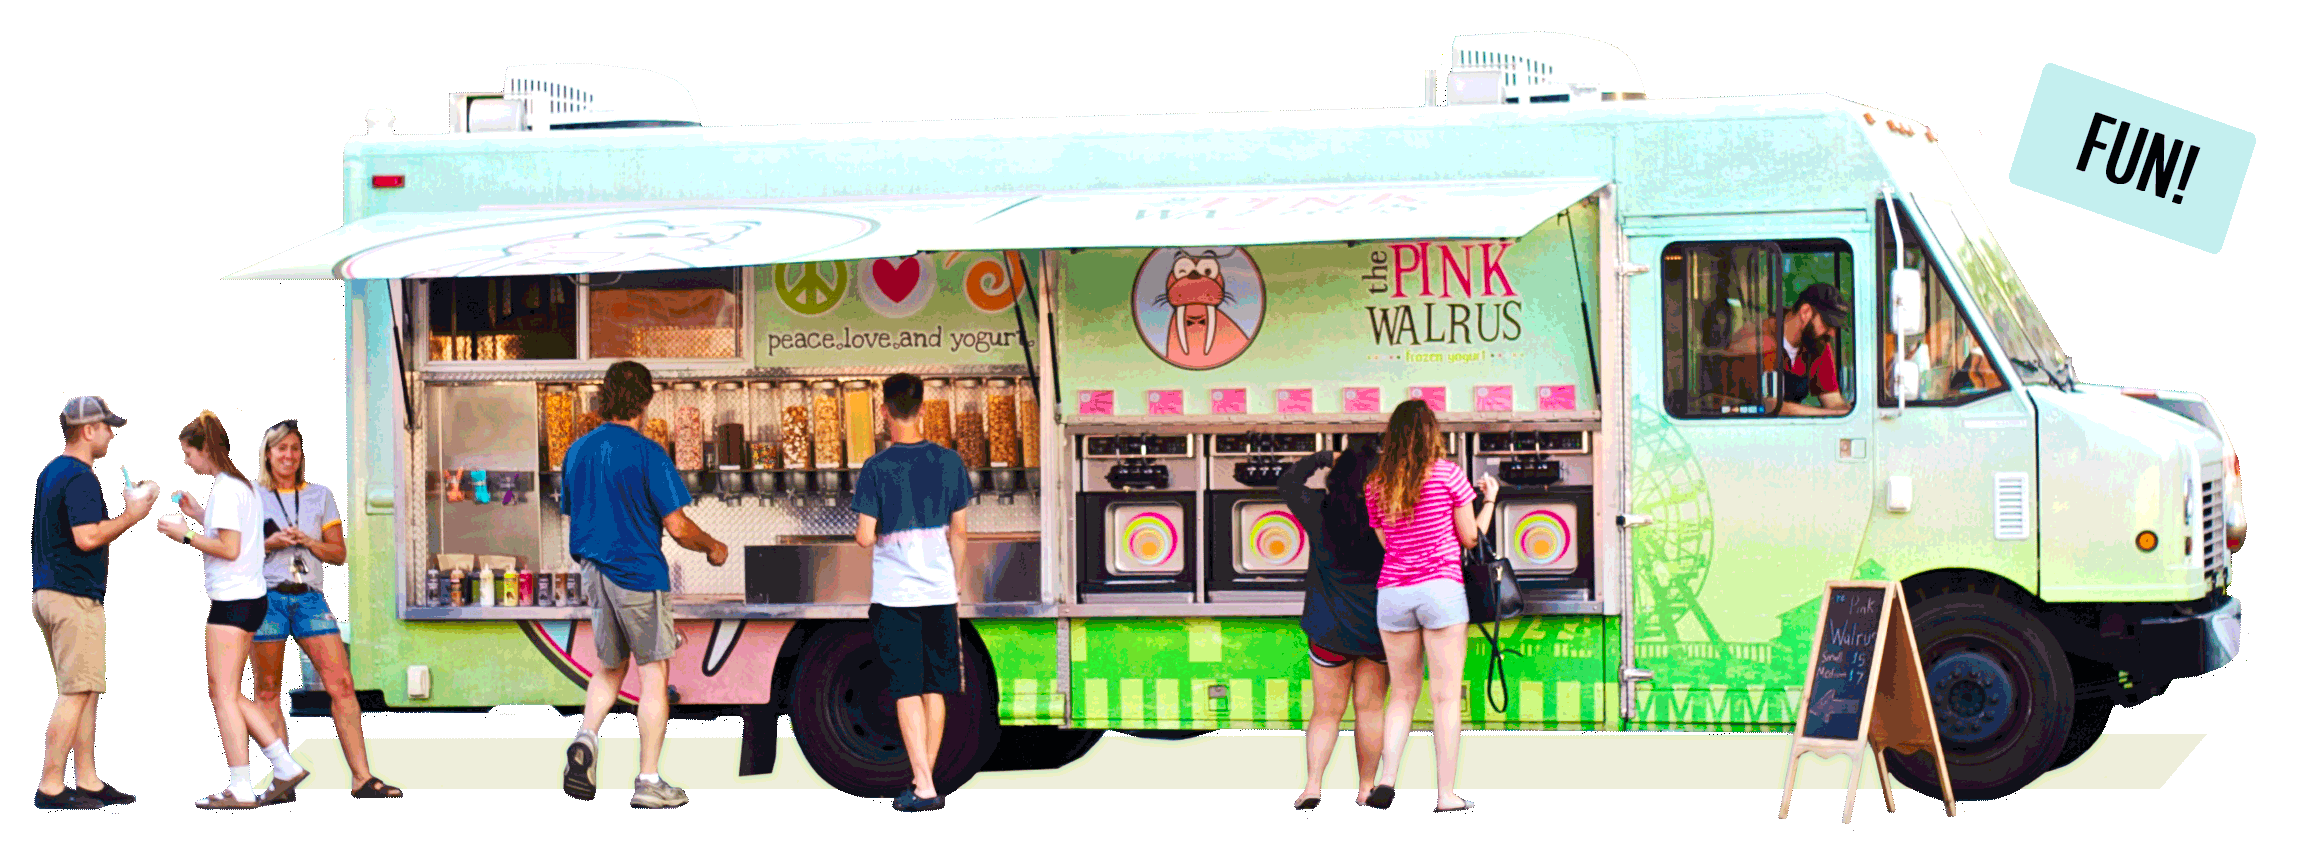 The Pink Walrus Food Truck